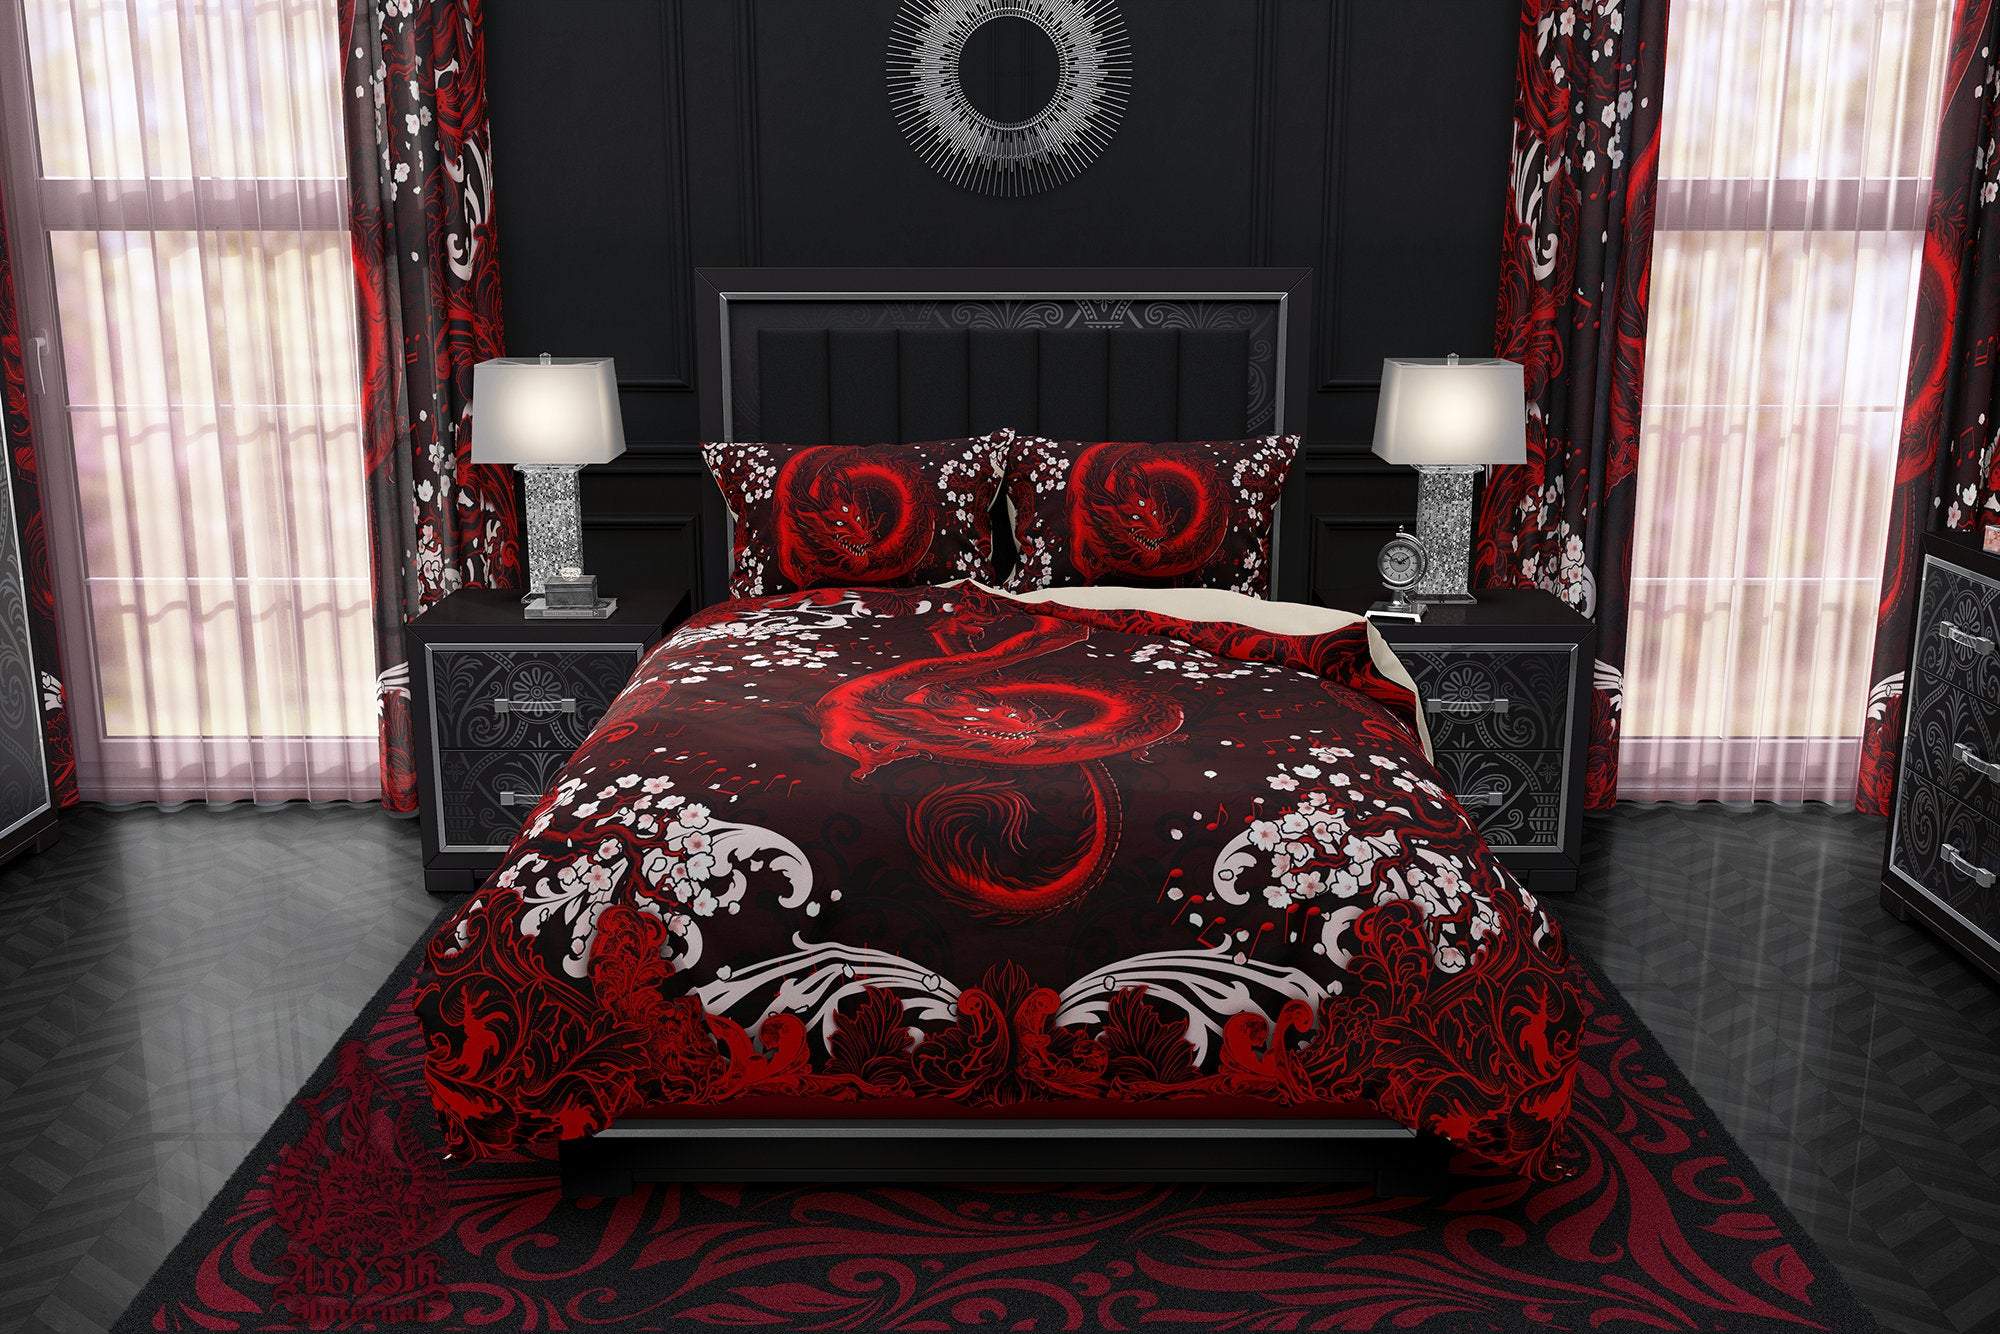 Red Dragon Bedding Set, Comforter and Duvet, Gothic Music Bed Cover and Bedroom Decor, King, Queen and Twin Size - Bloody Black - Abysm Internal